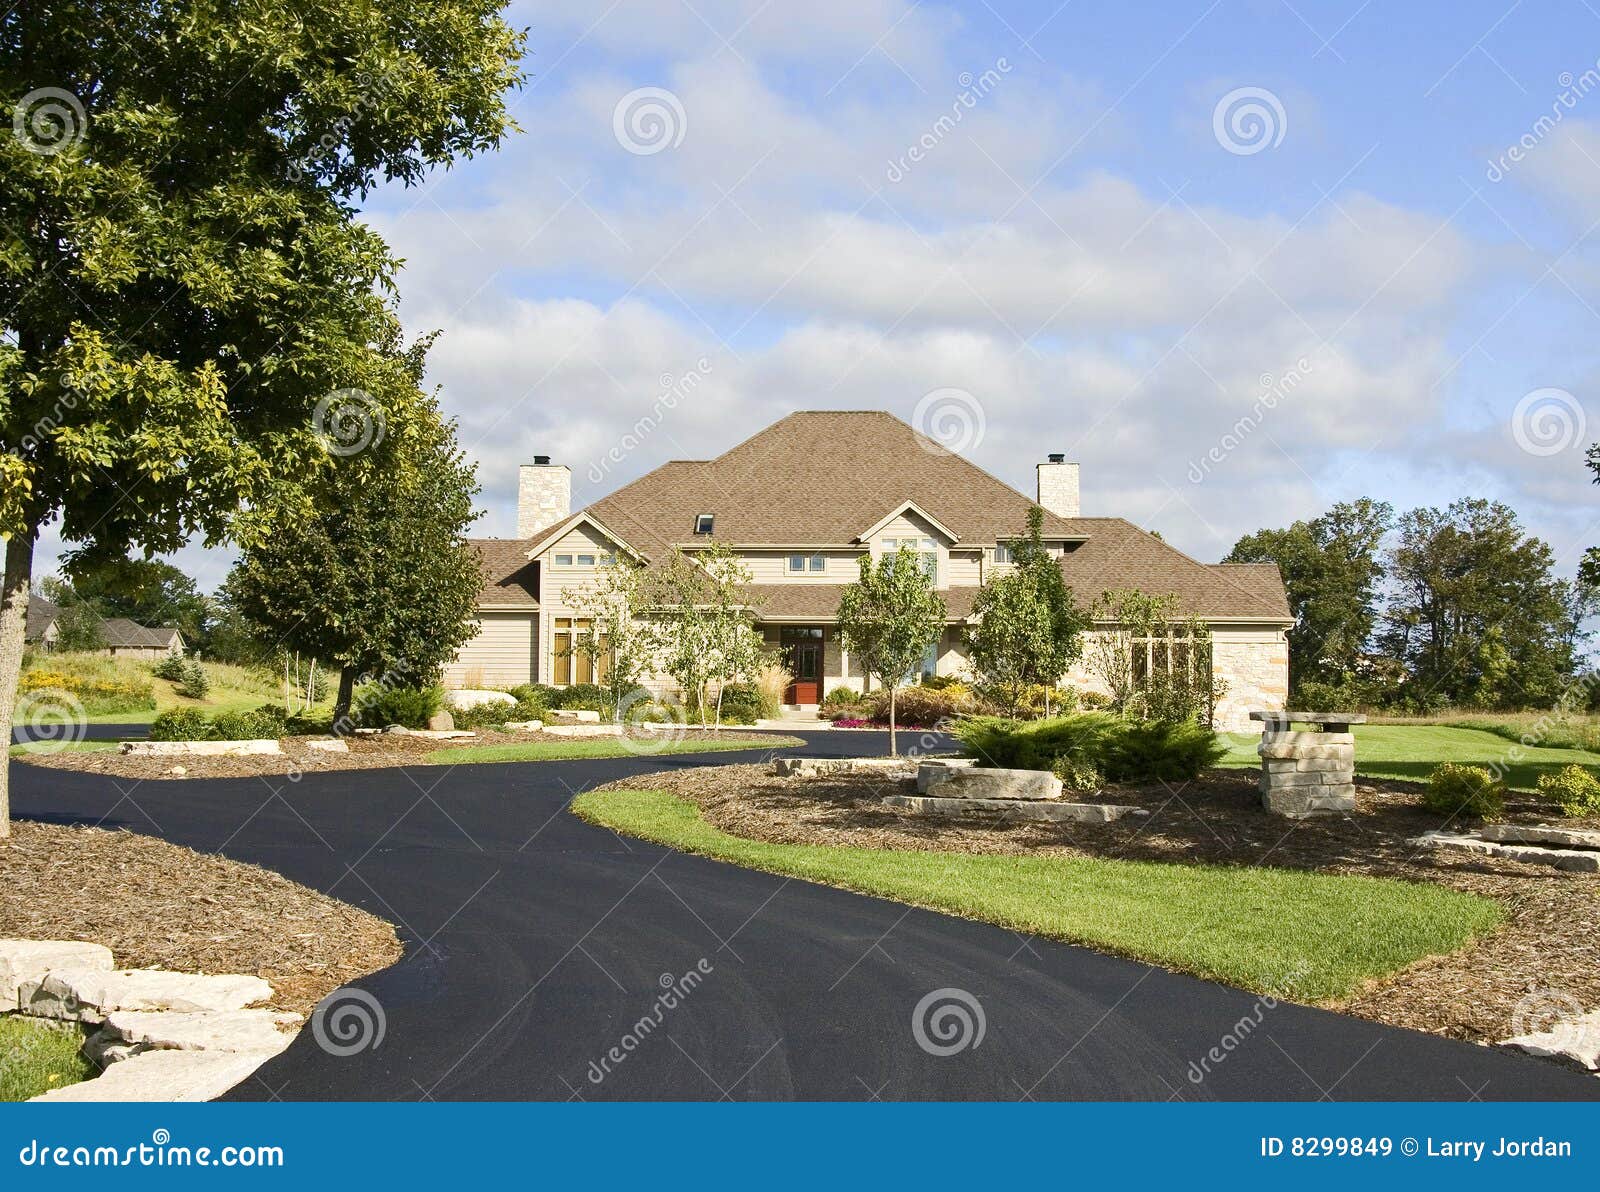 upscale home new paved driveway